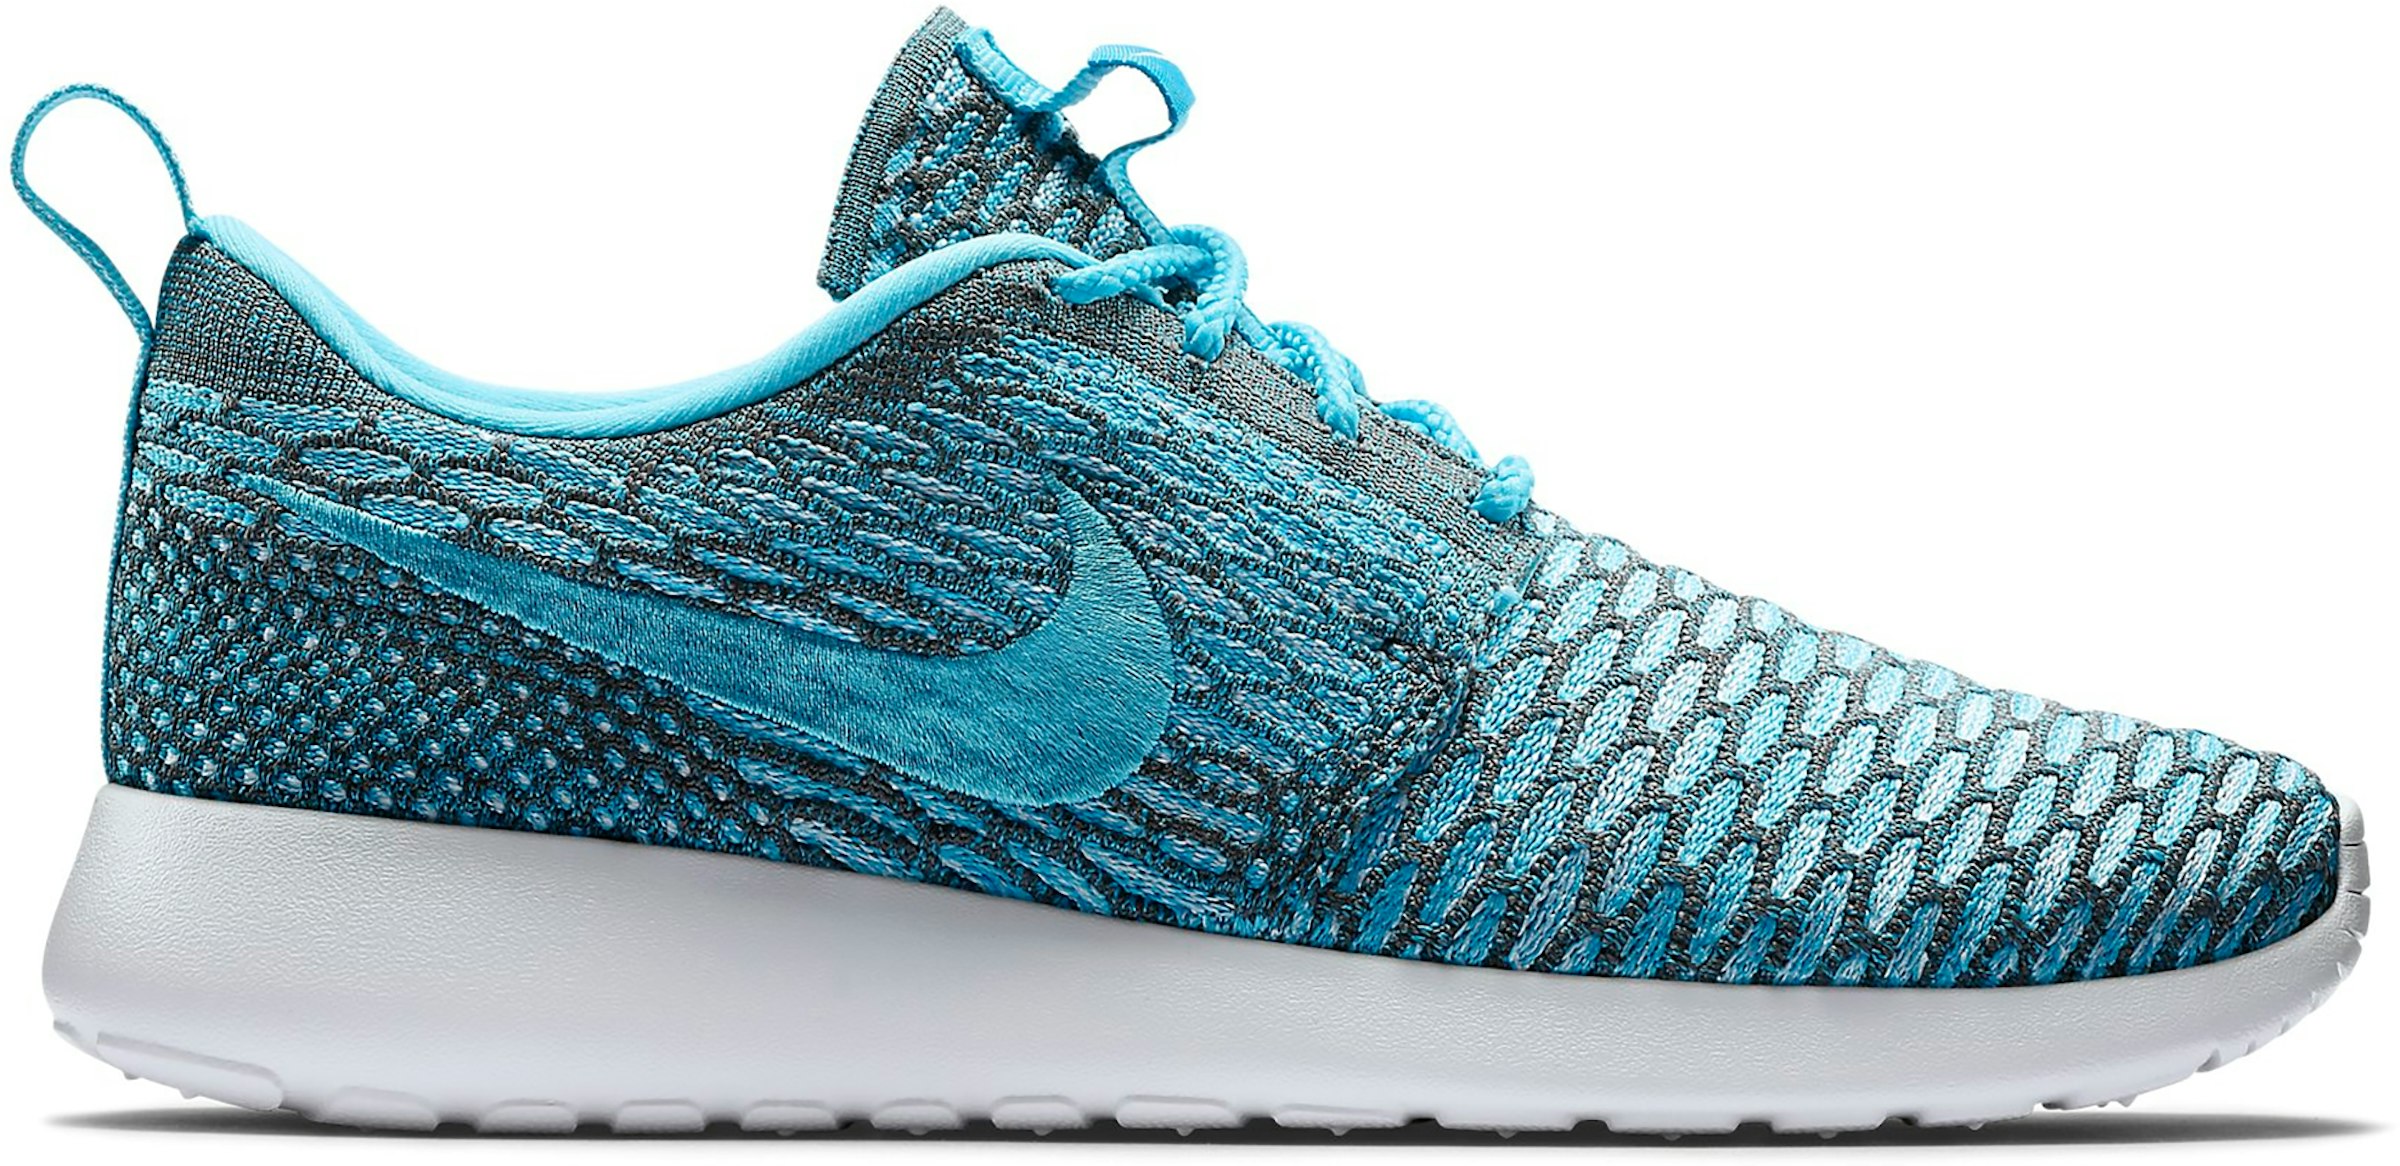 partes aprobar Chillido Nike Roshe Run Flyknit Clearwater (Women's) - 704927-003 - US